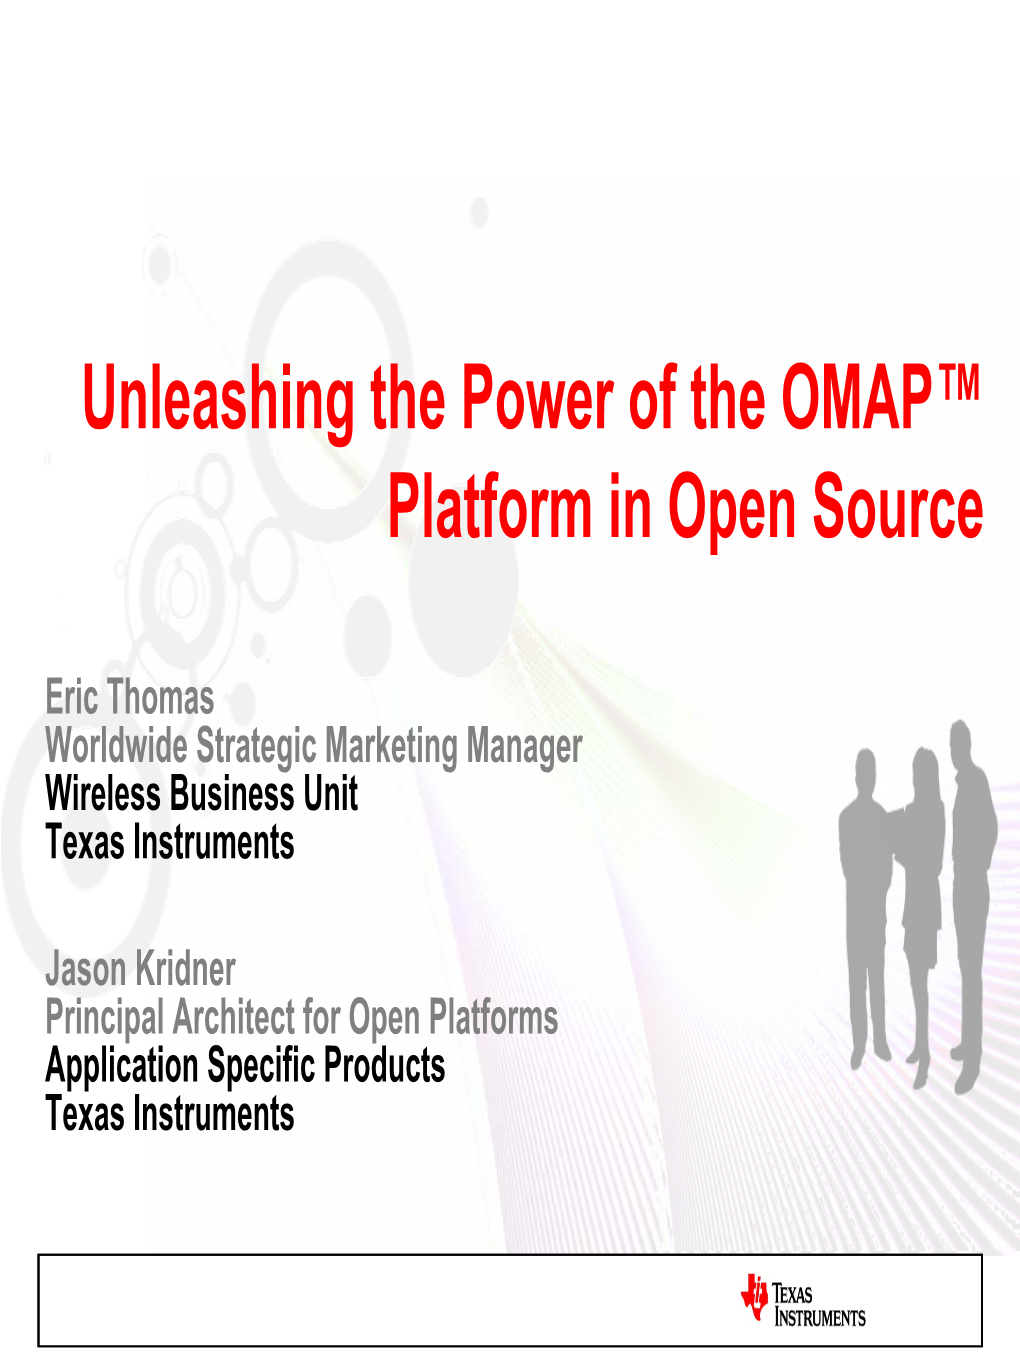 Unleashing the Power of the OMAP(TM